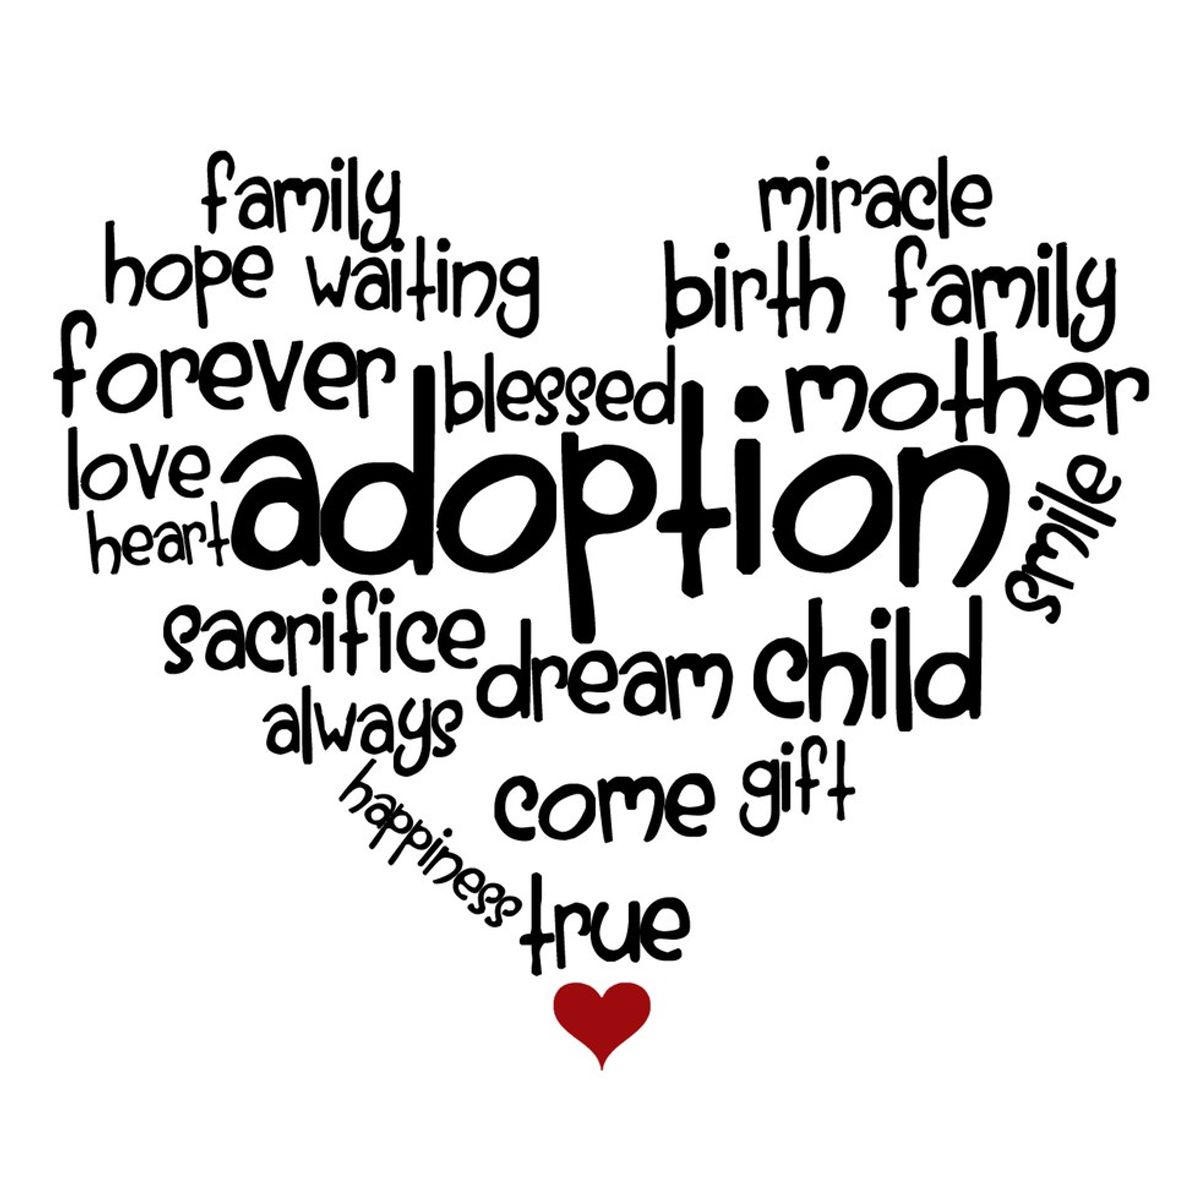 8 Things That Come With Being Adopted